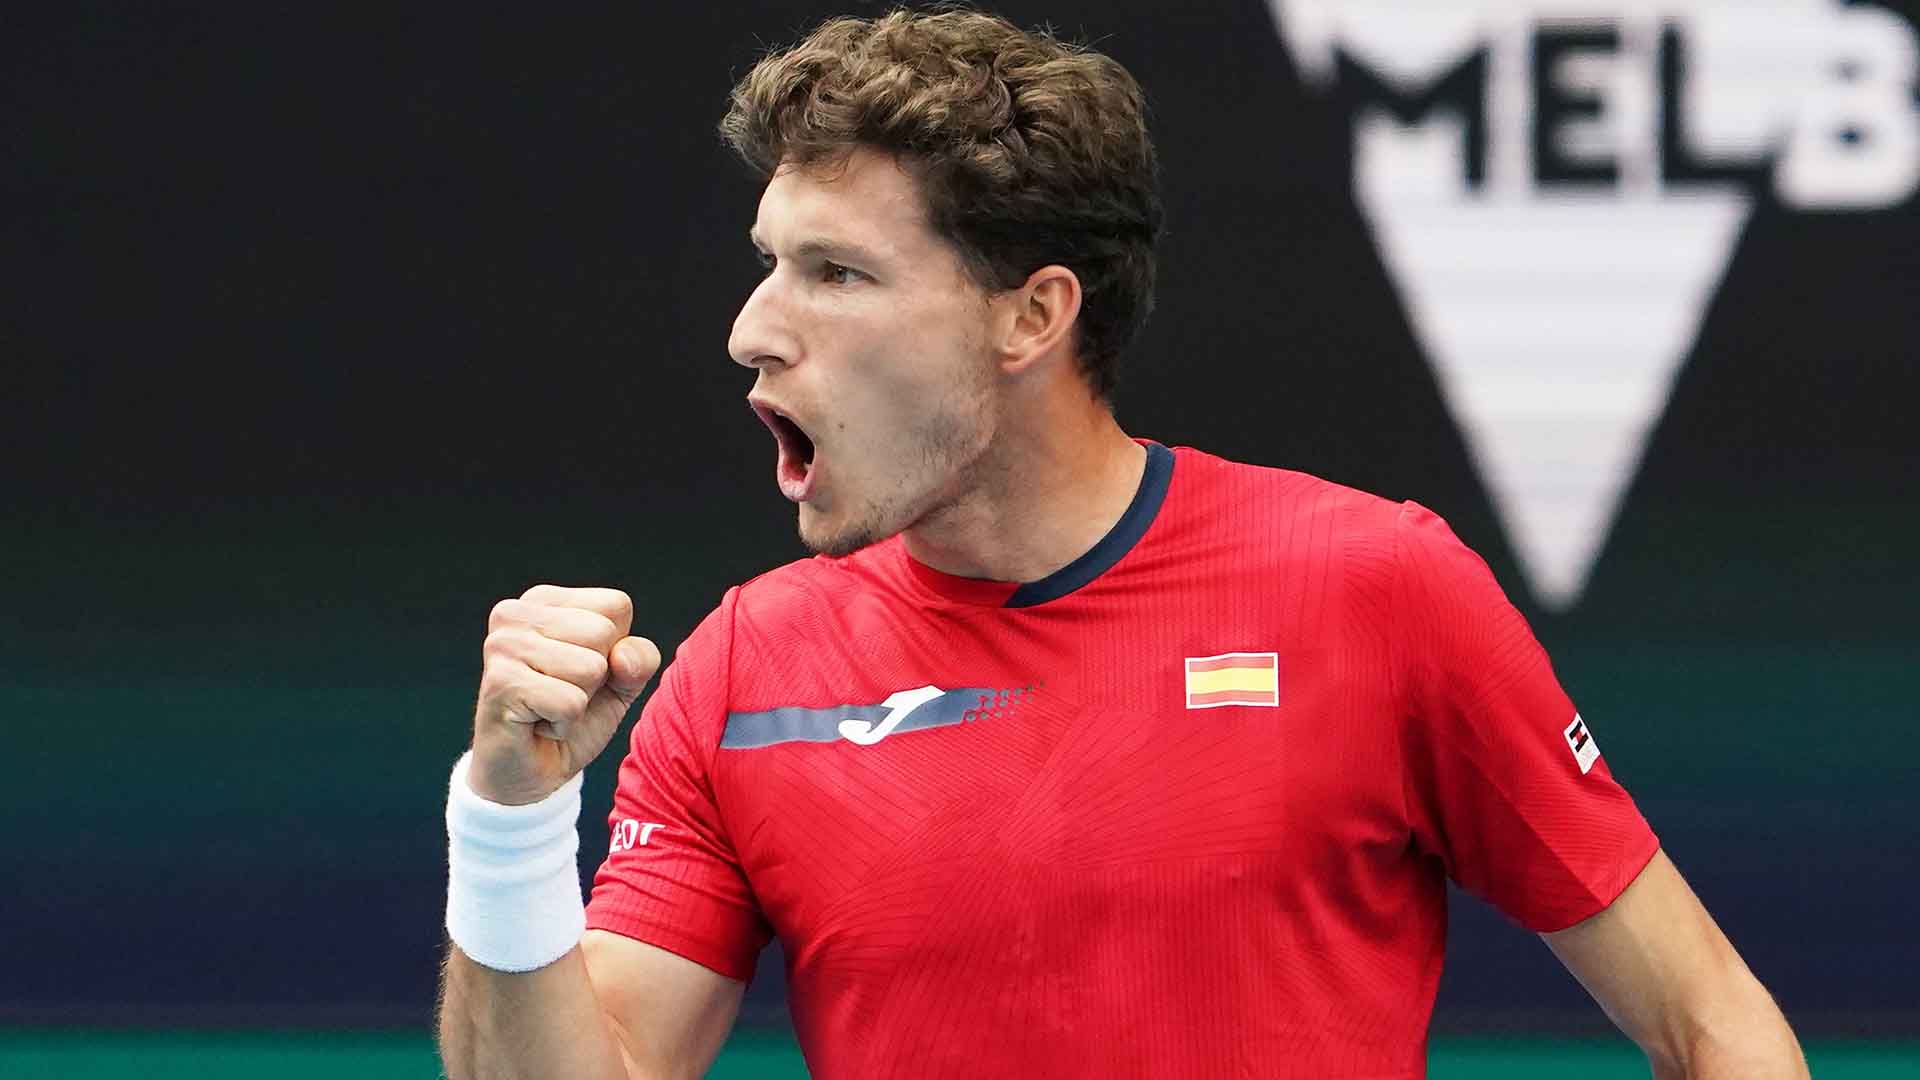 Pablo Carreno Busta converts four of seven break points to defeat John Millman in straights sets at the ATP Cup on Tuesday.